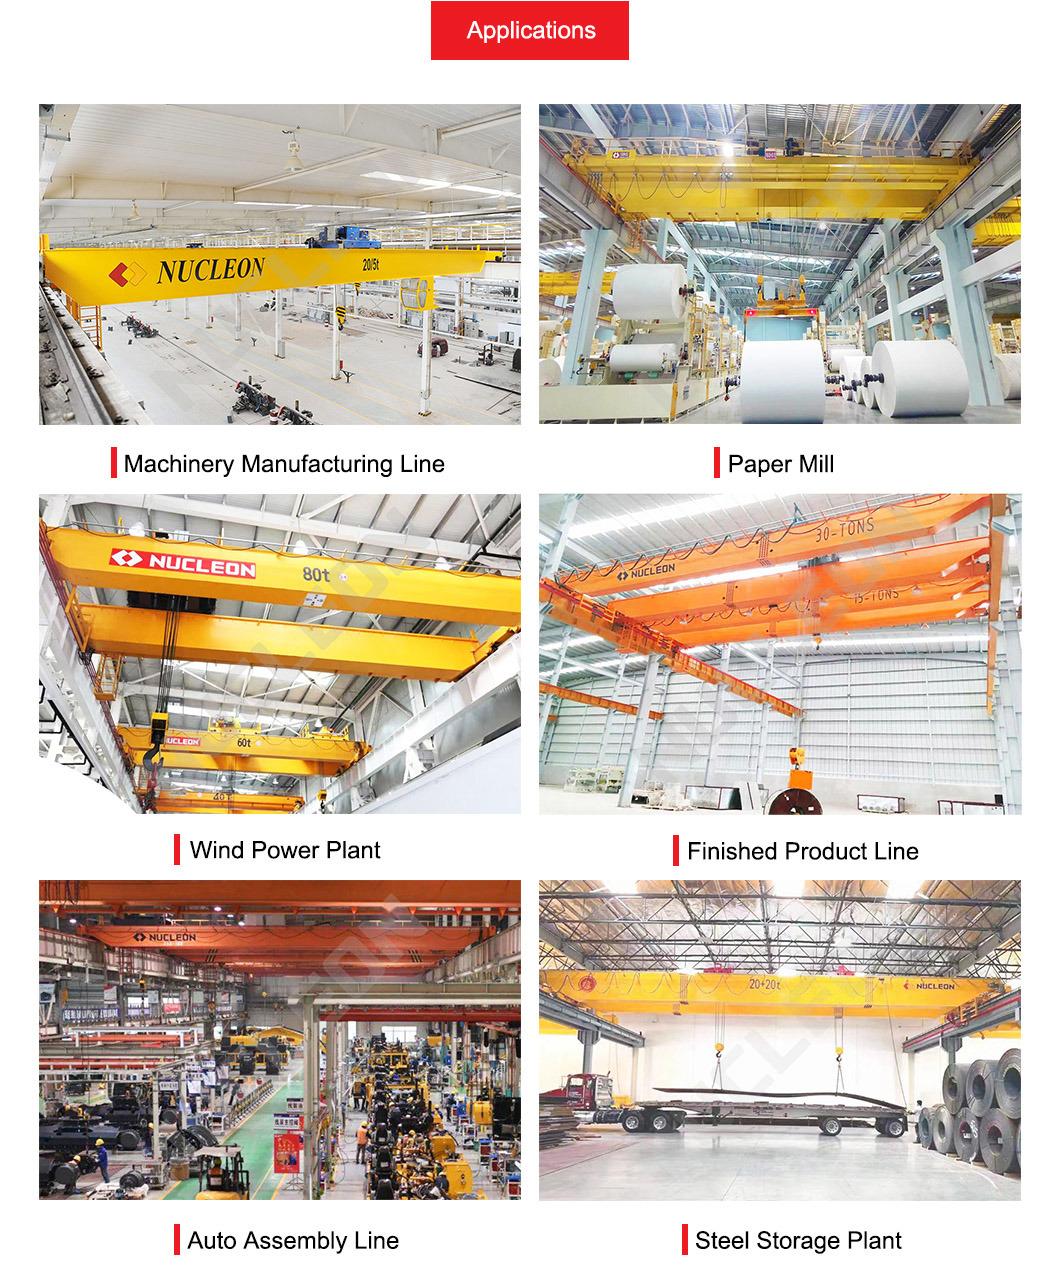 CE Certified Industrial 30t Double Girder Bridge Crane for Cable Manufacturing Shop